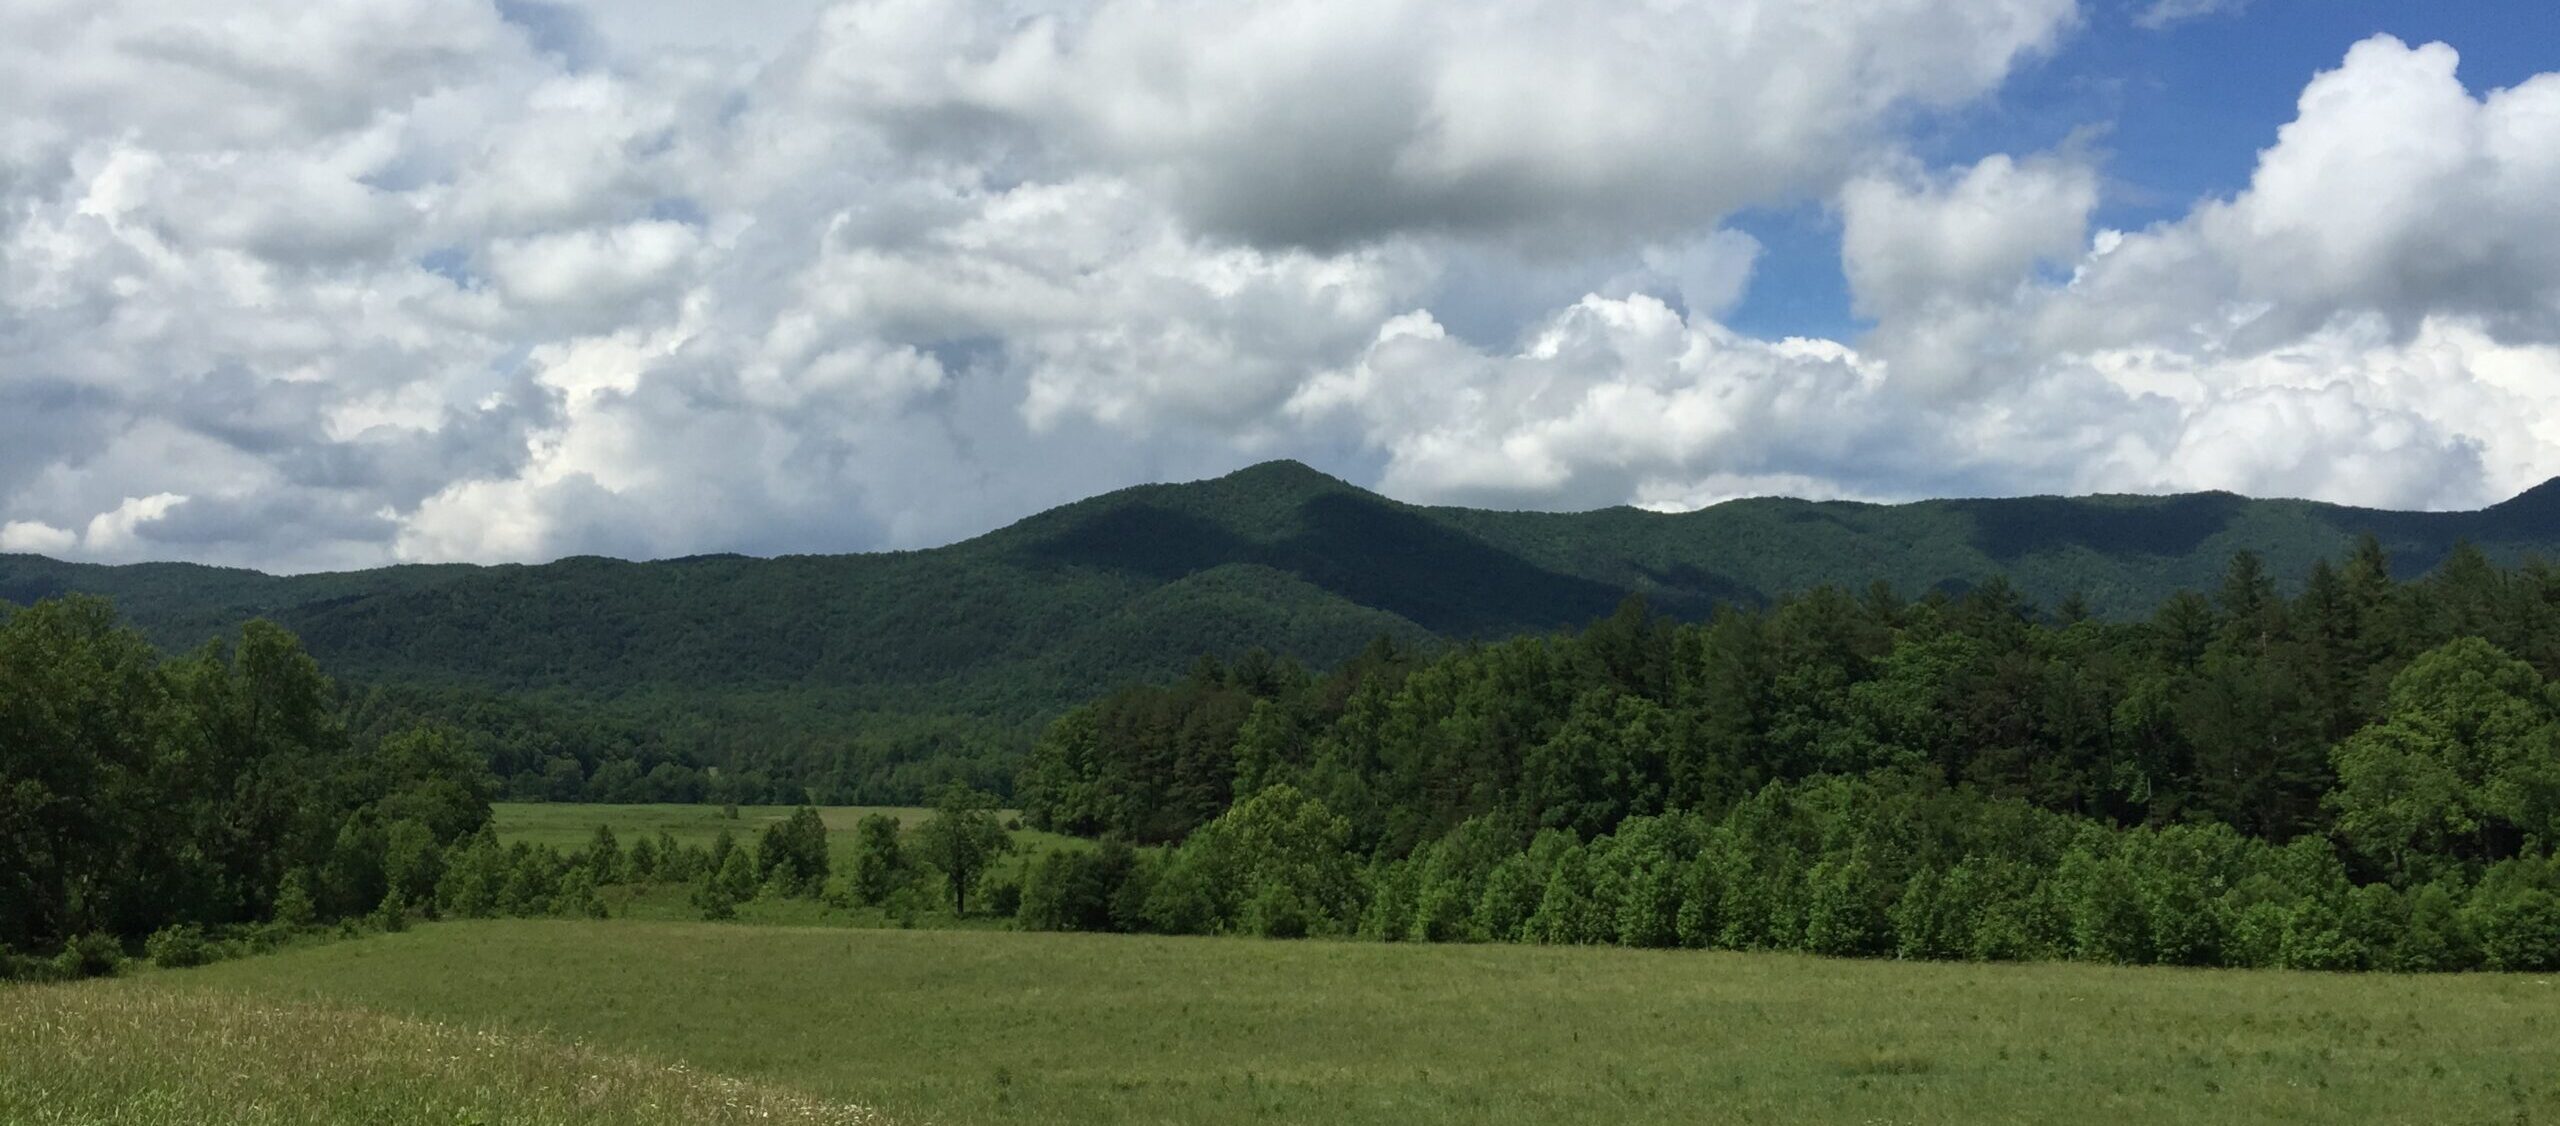 Cades Cove, Great Smoky Mountains National Park, Tennessee, with fields in foreground ringed by woods, wooded foothill mountains in background, bright white puffy clouds against deep blue sky